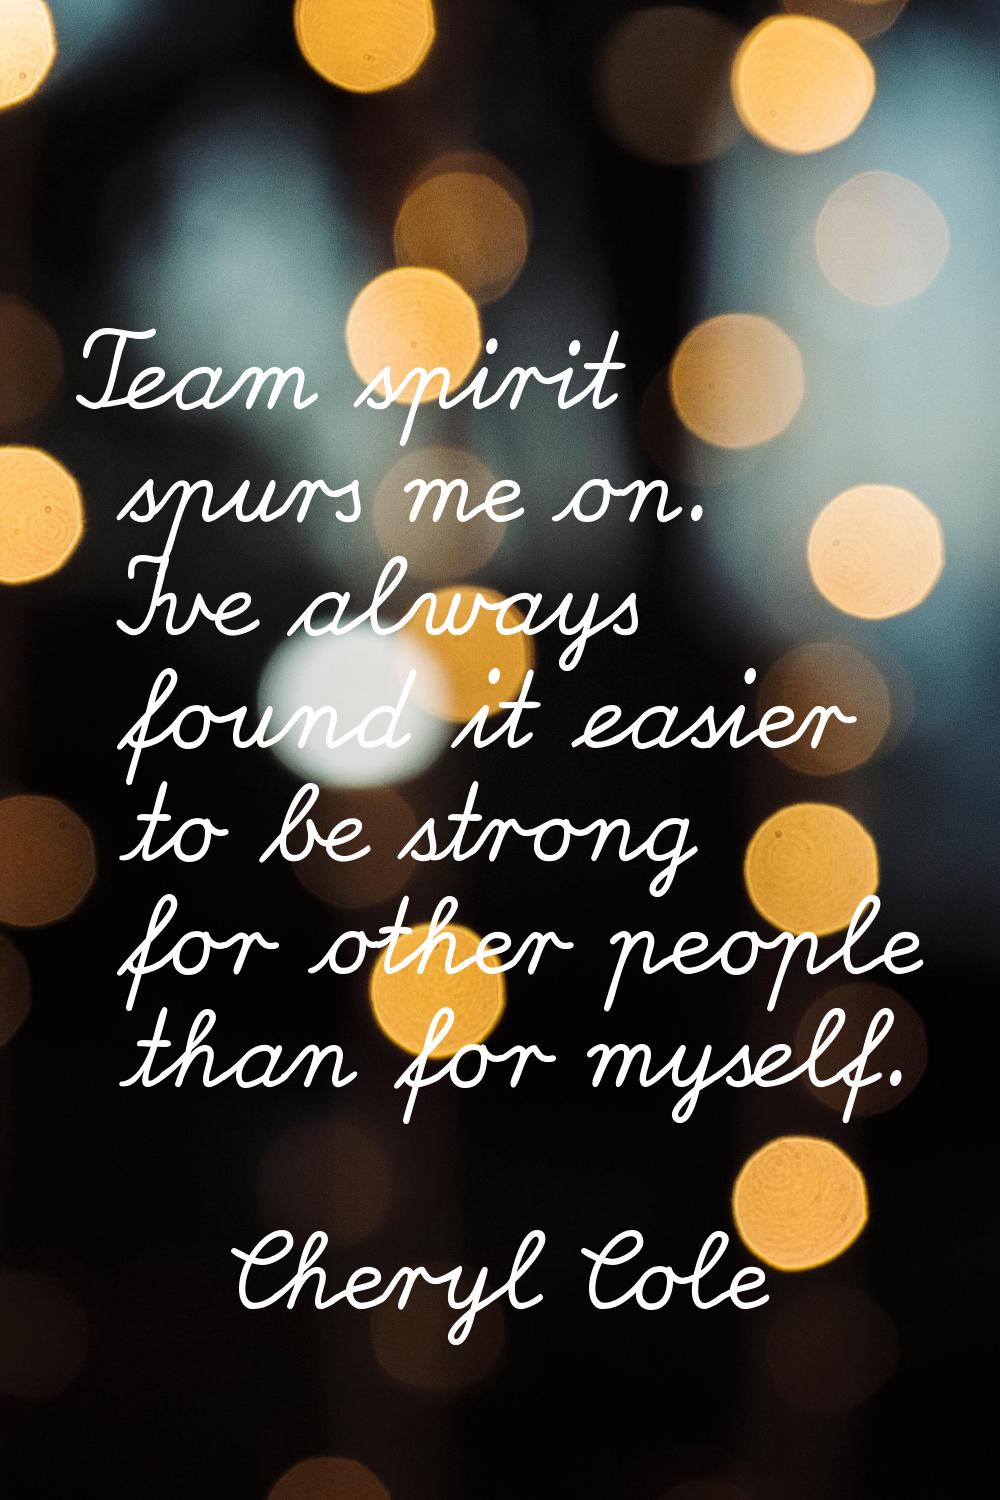 Team spirit spurs me on. I've always found it easier to be strong for other people than for myself.